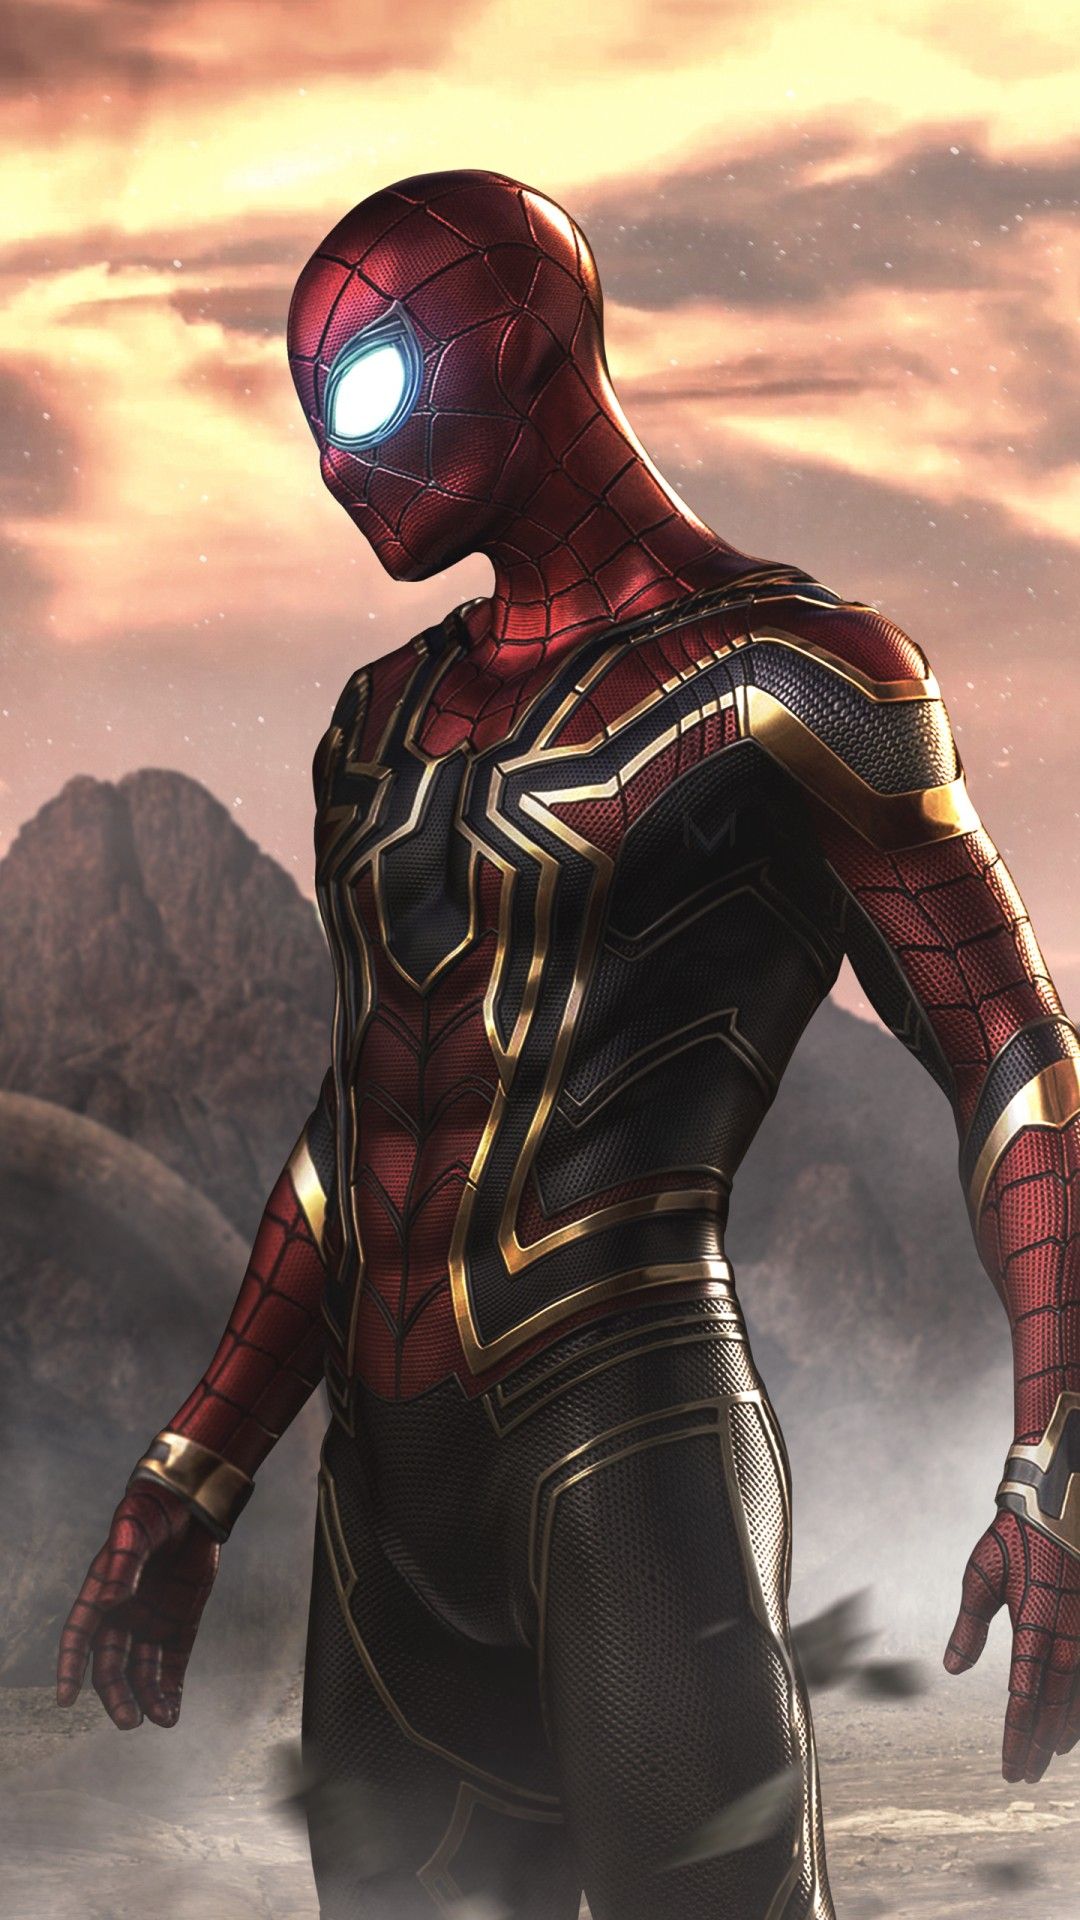 Spiderman HD Wallpaper For Android